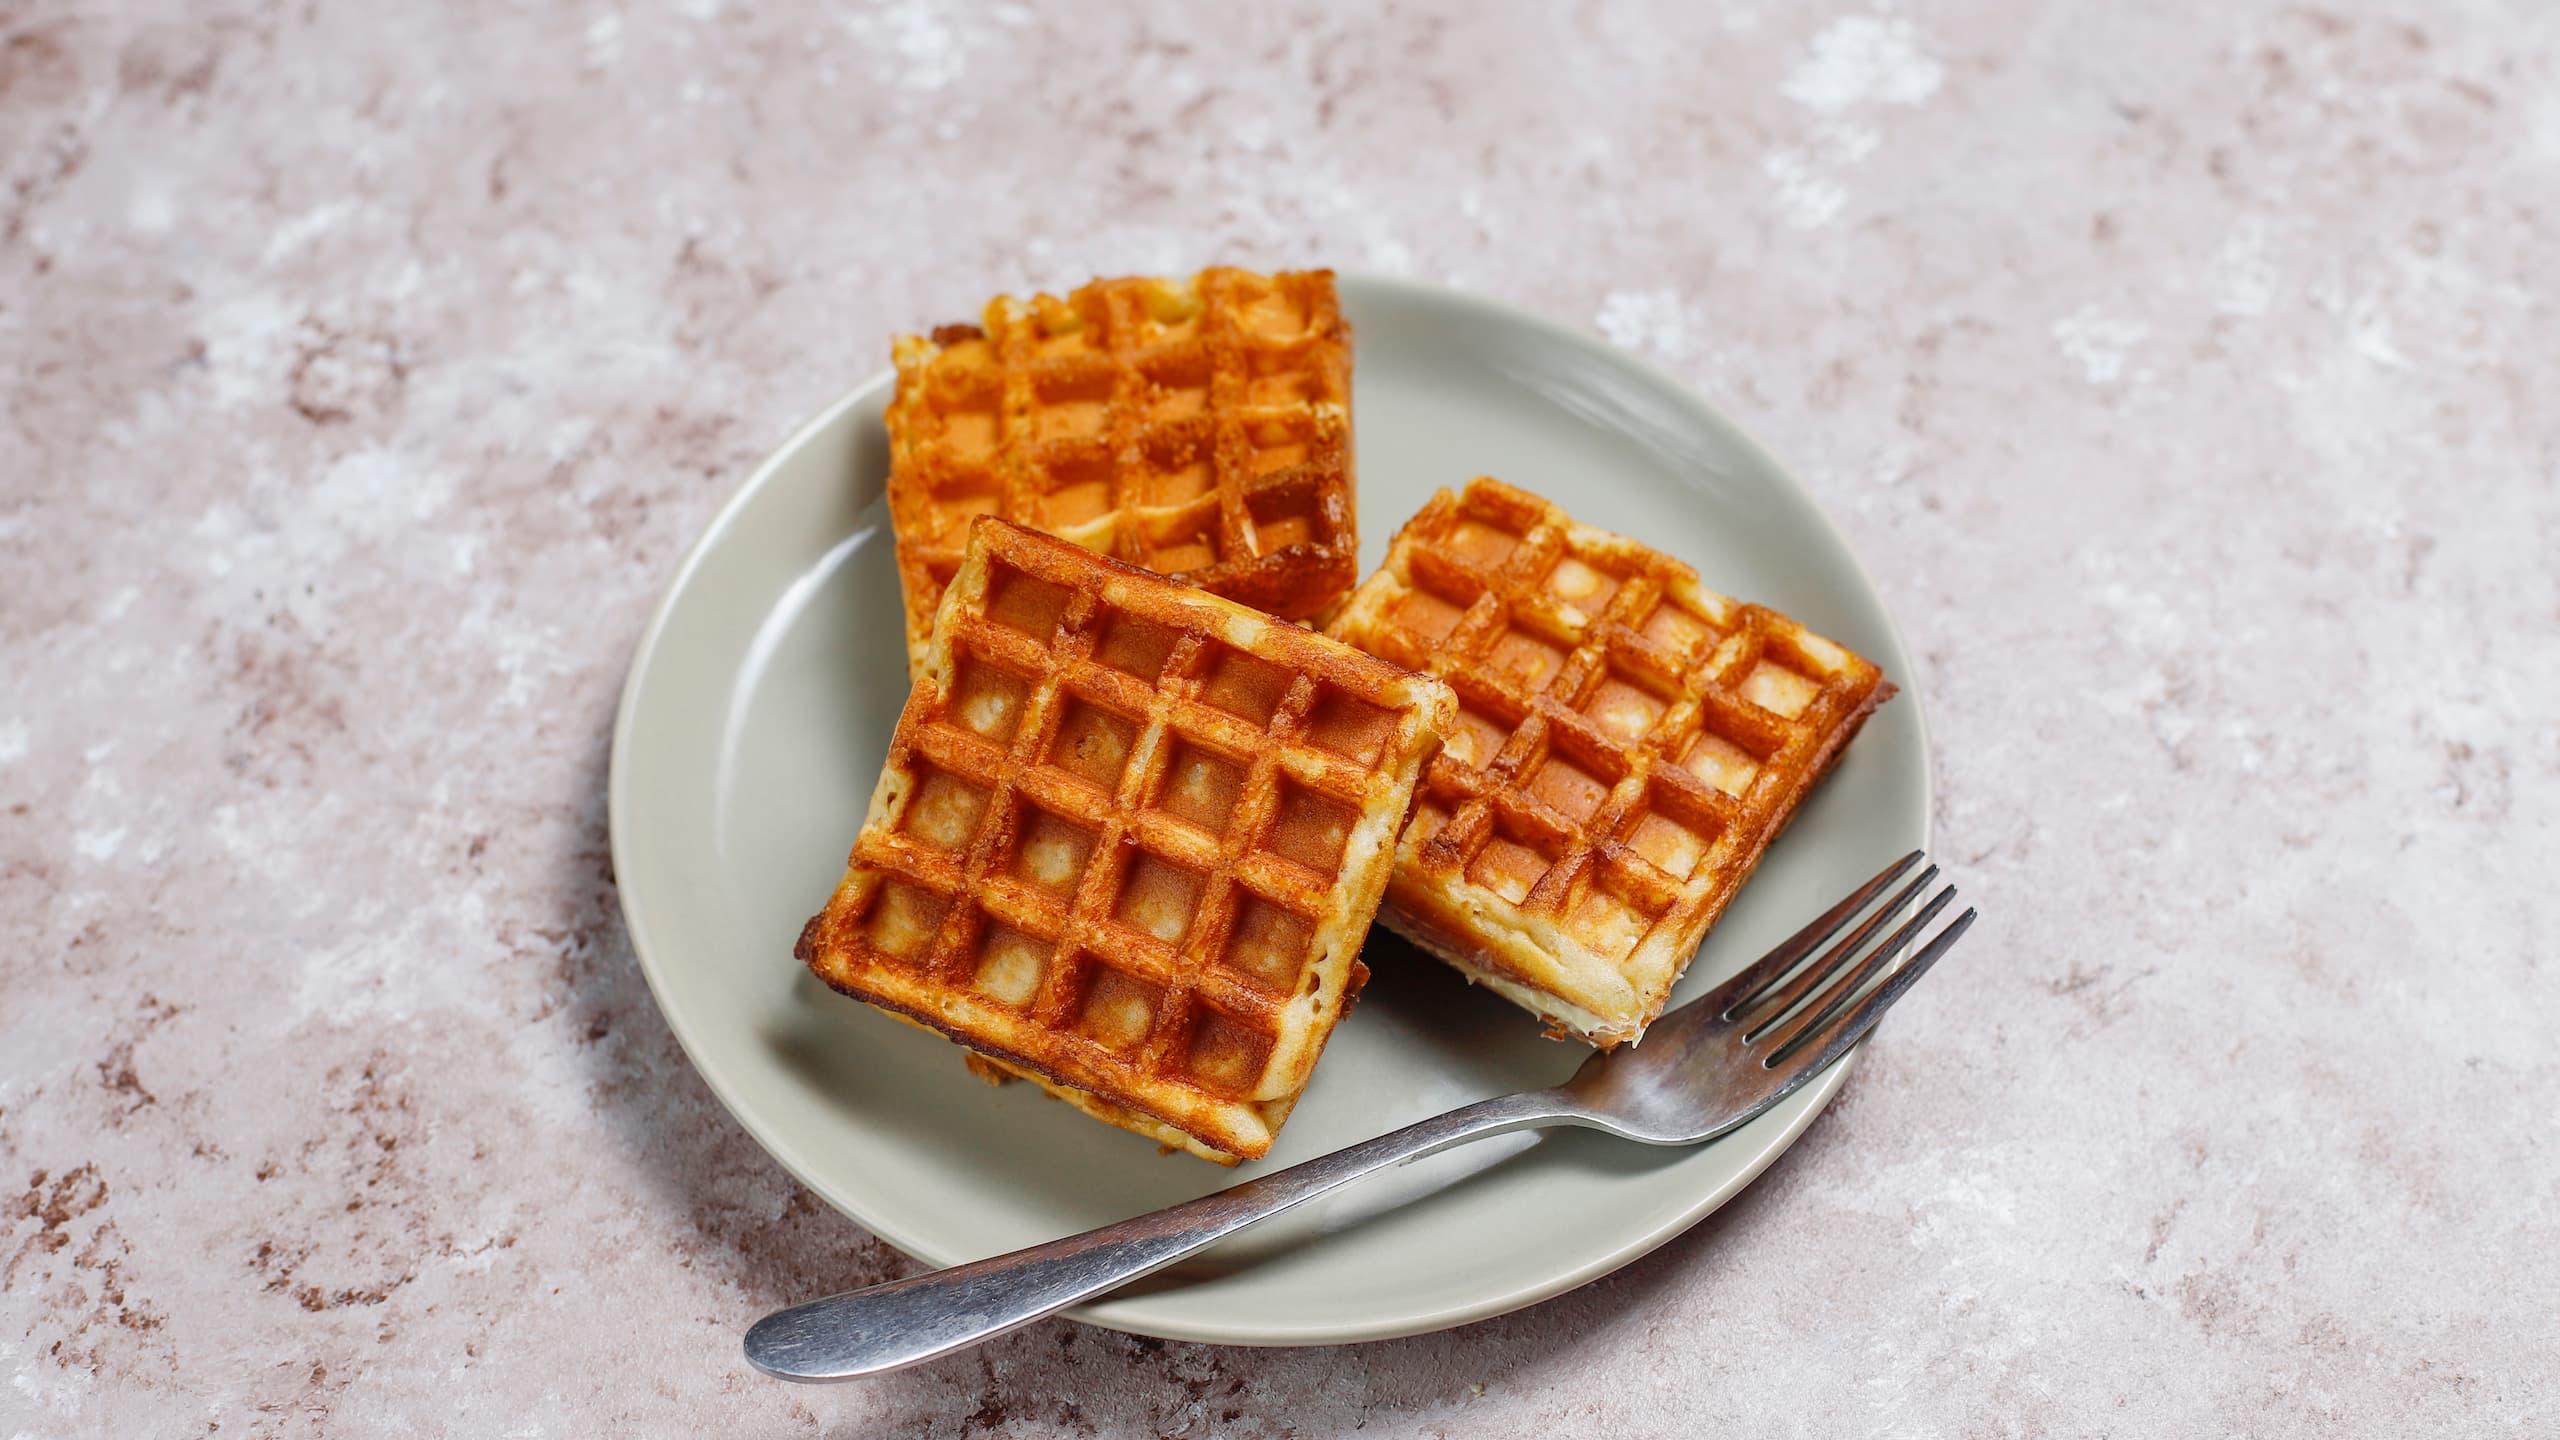 Delicious Herbalife waffle recipe for breakfast